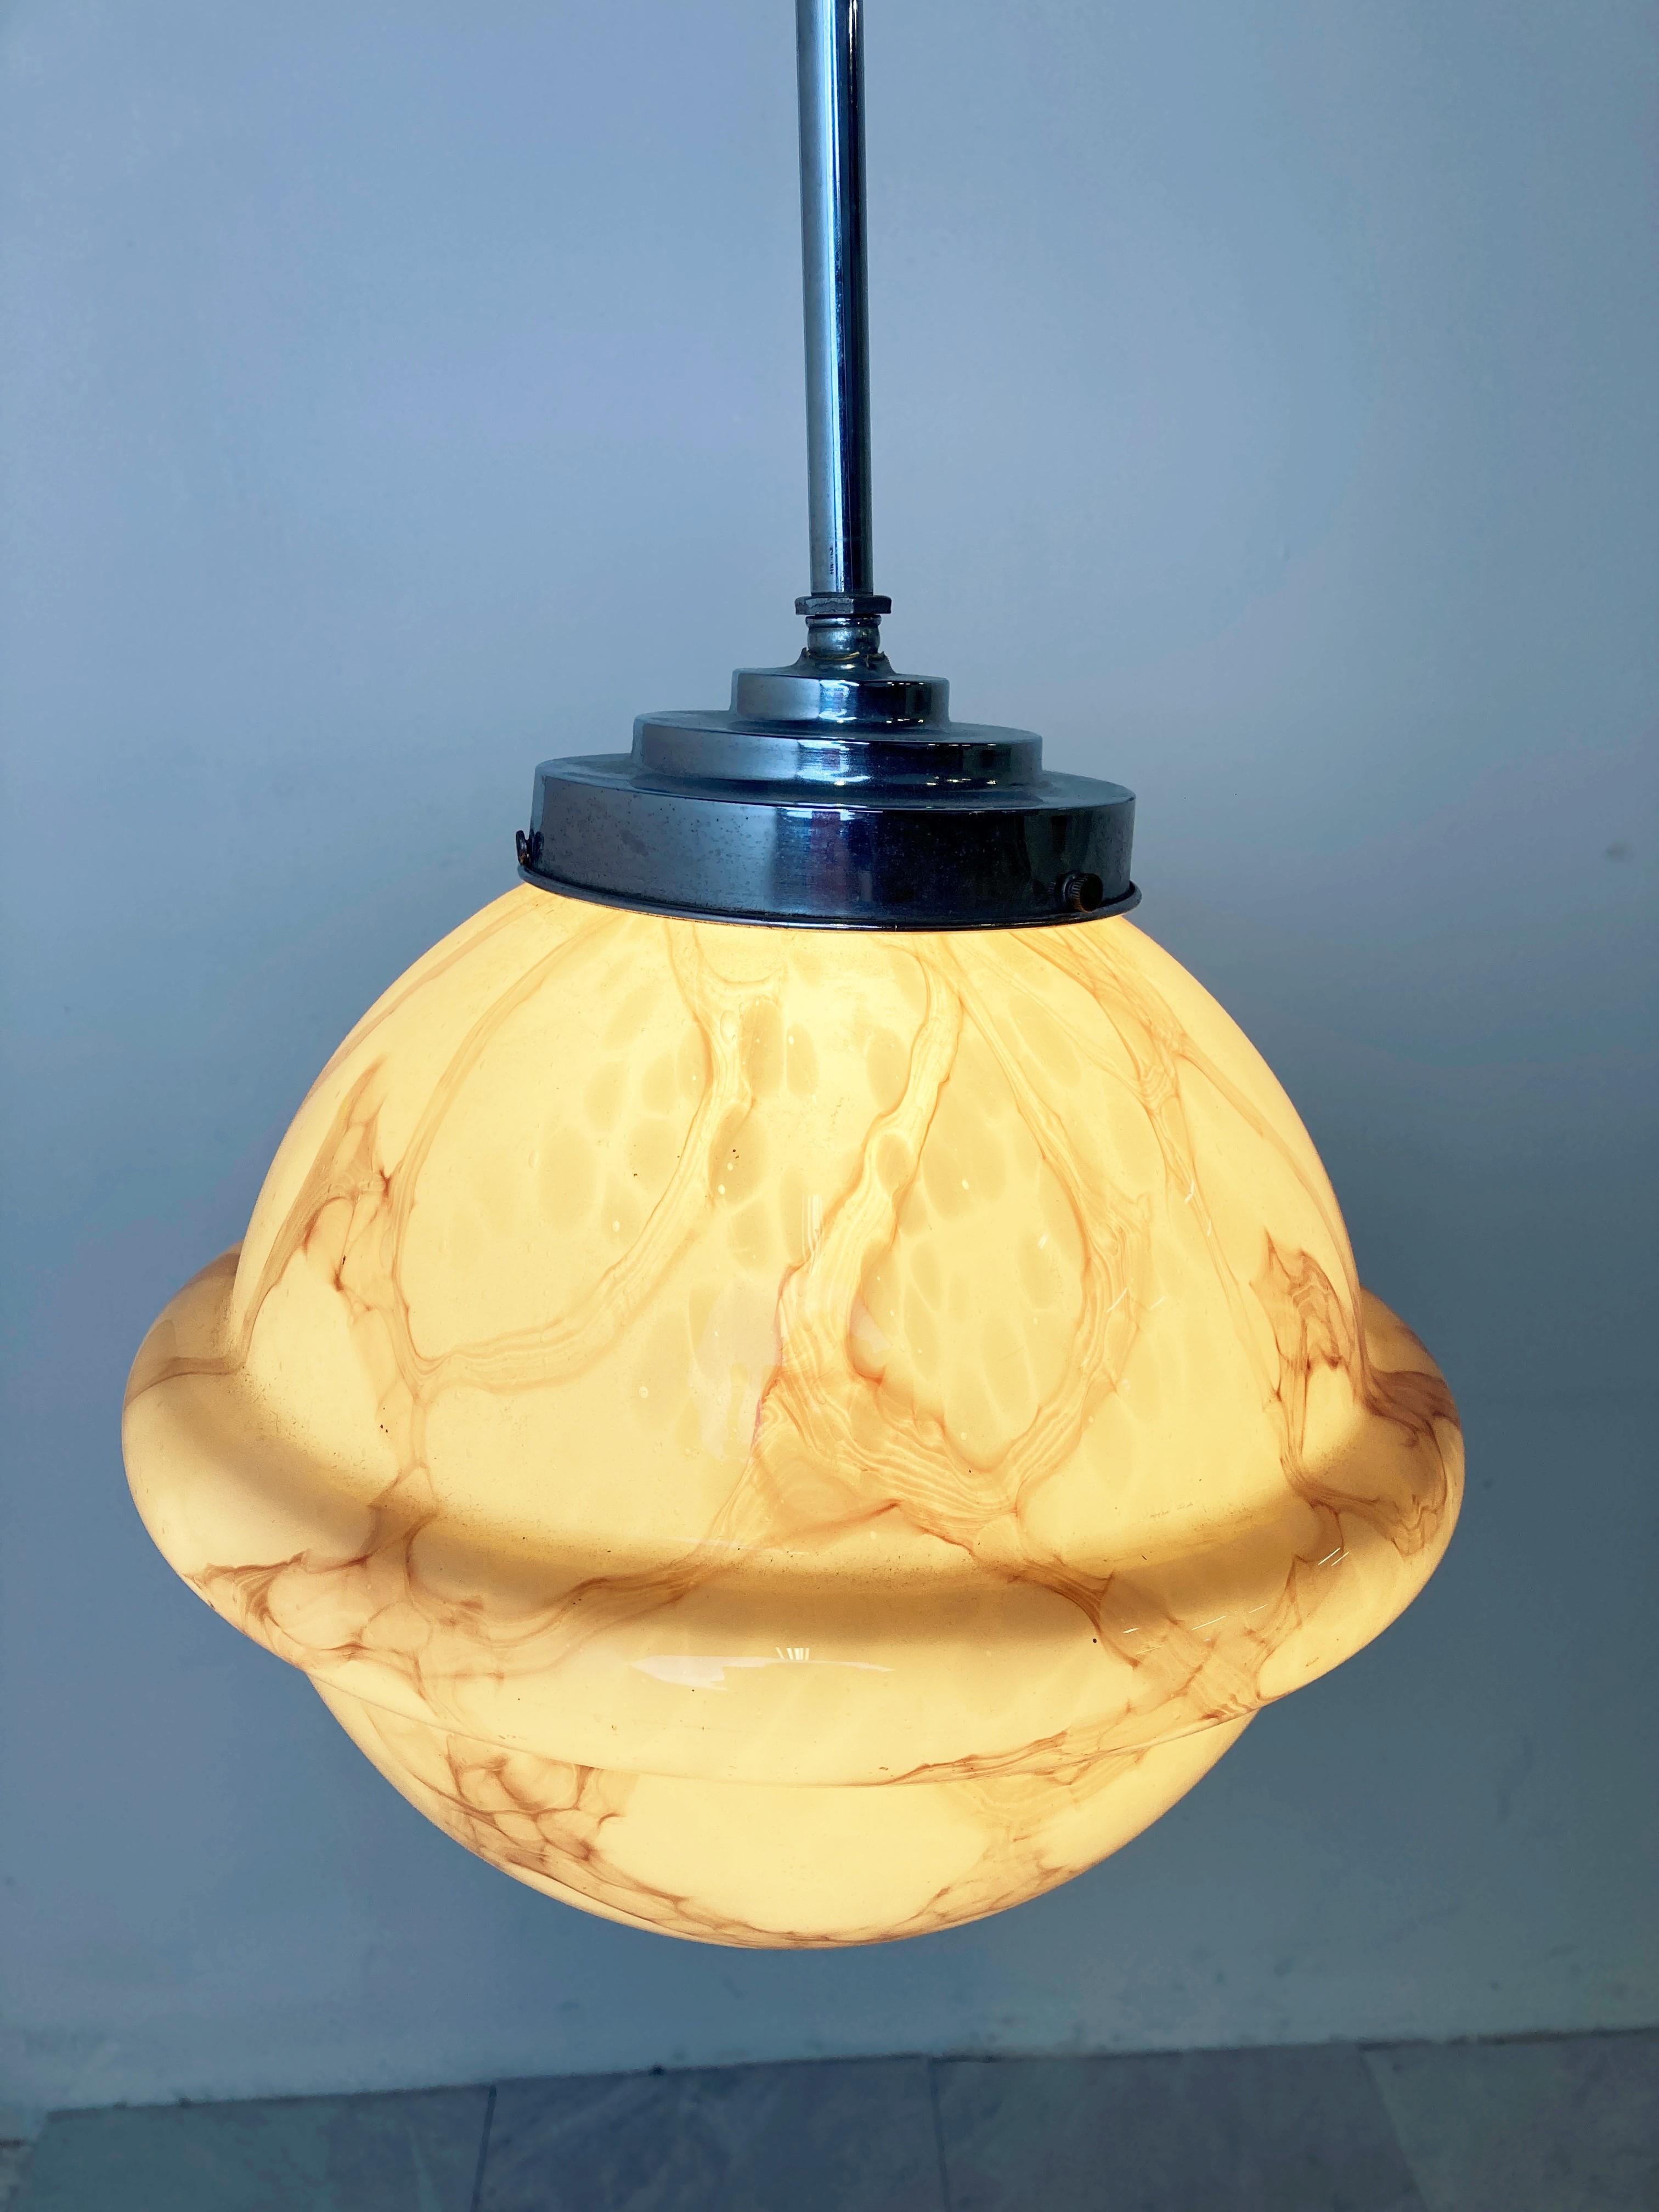 Antique Art Deco hallway pendant light with a beautiful marbled opaline lamp shade emitting a stunning light.

This lamp is very typical for the art deco era and were widely used to be hung in hallways, offices or larger public places.

The lamp